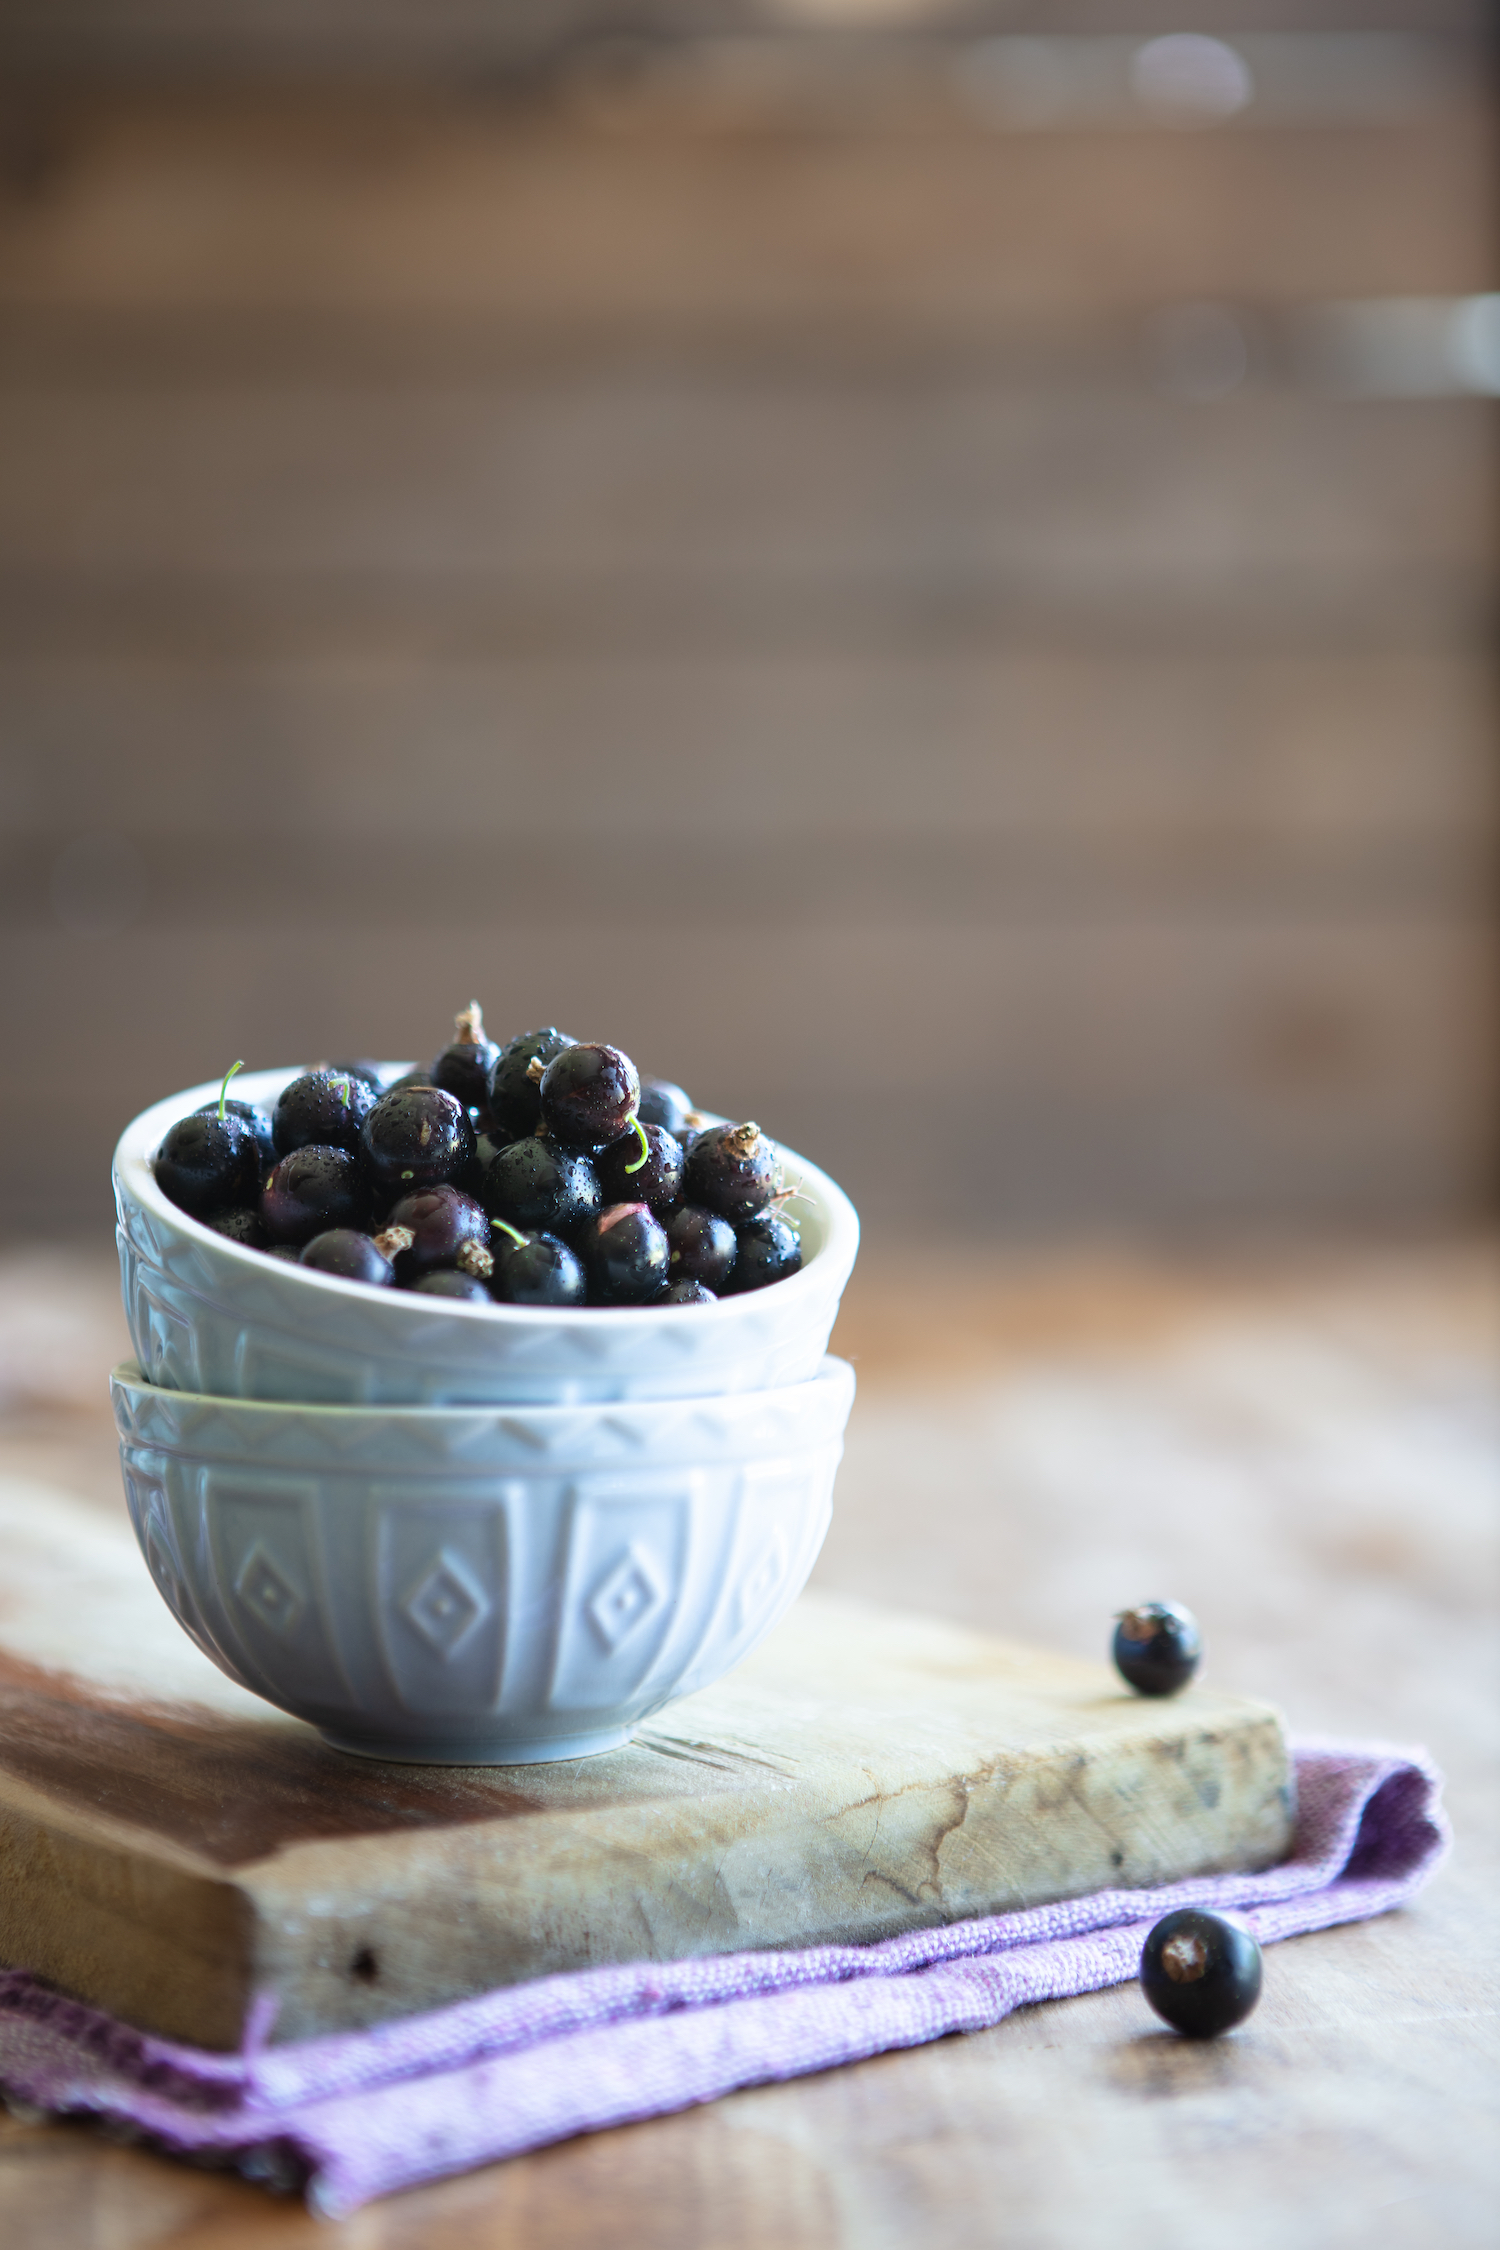 Blackcurrants stacked in a pale blue bowl in rustic setting with scattered fruit